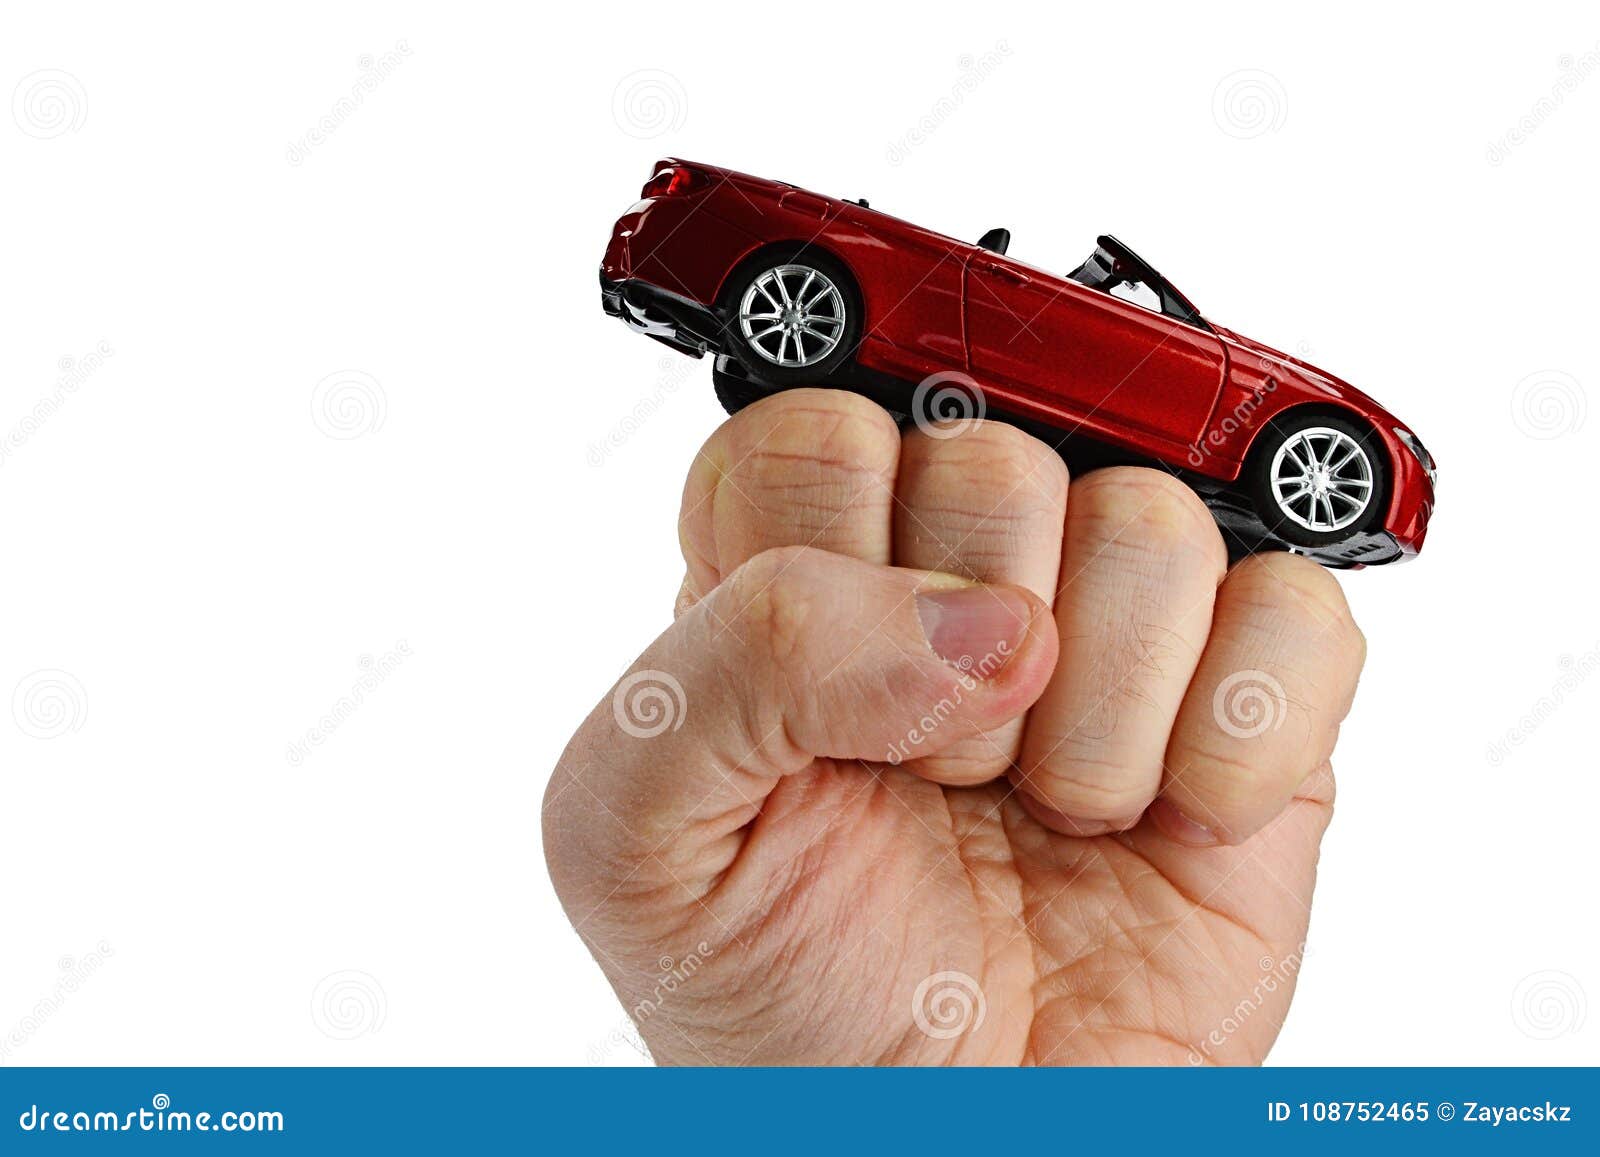 https://thumbs.dreamstime.com/z/red-convertible-german-cabriolet-car-model-placed-raised-fist-adult-man-white-background-108752465.jpg